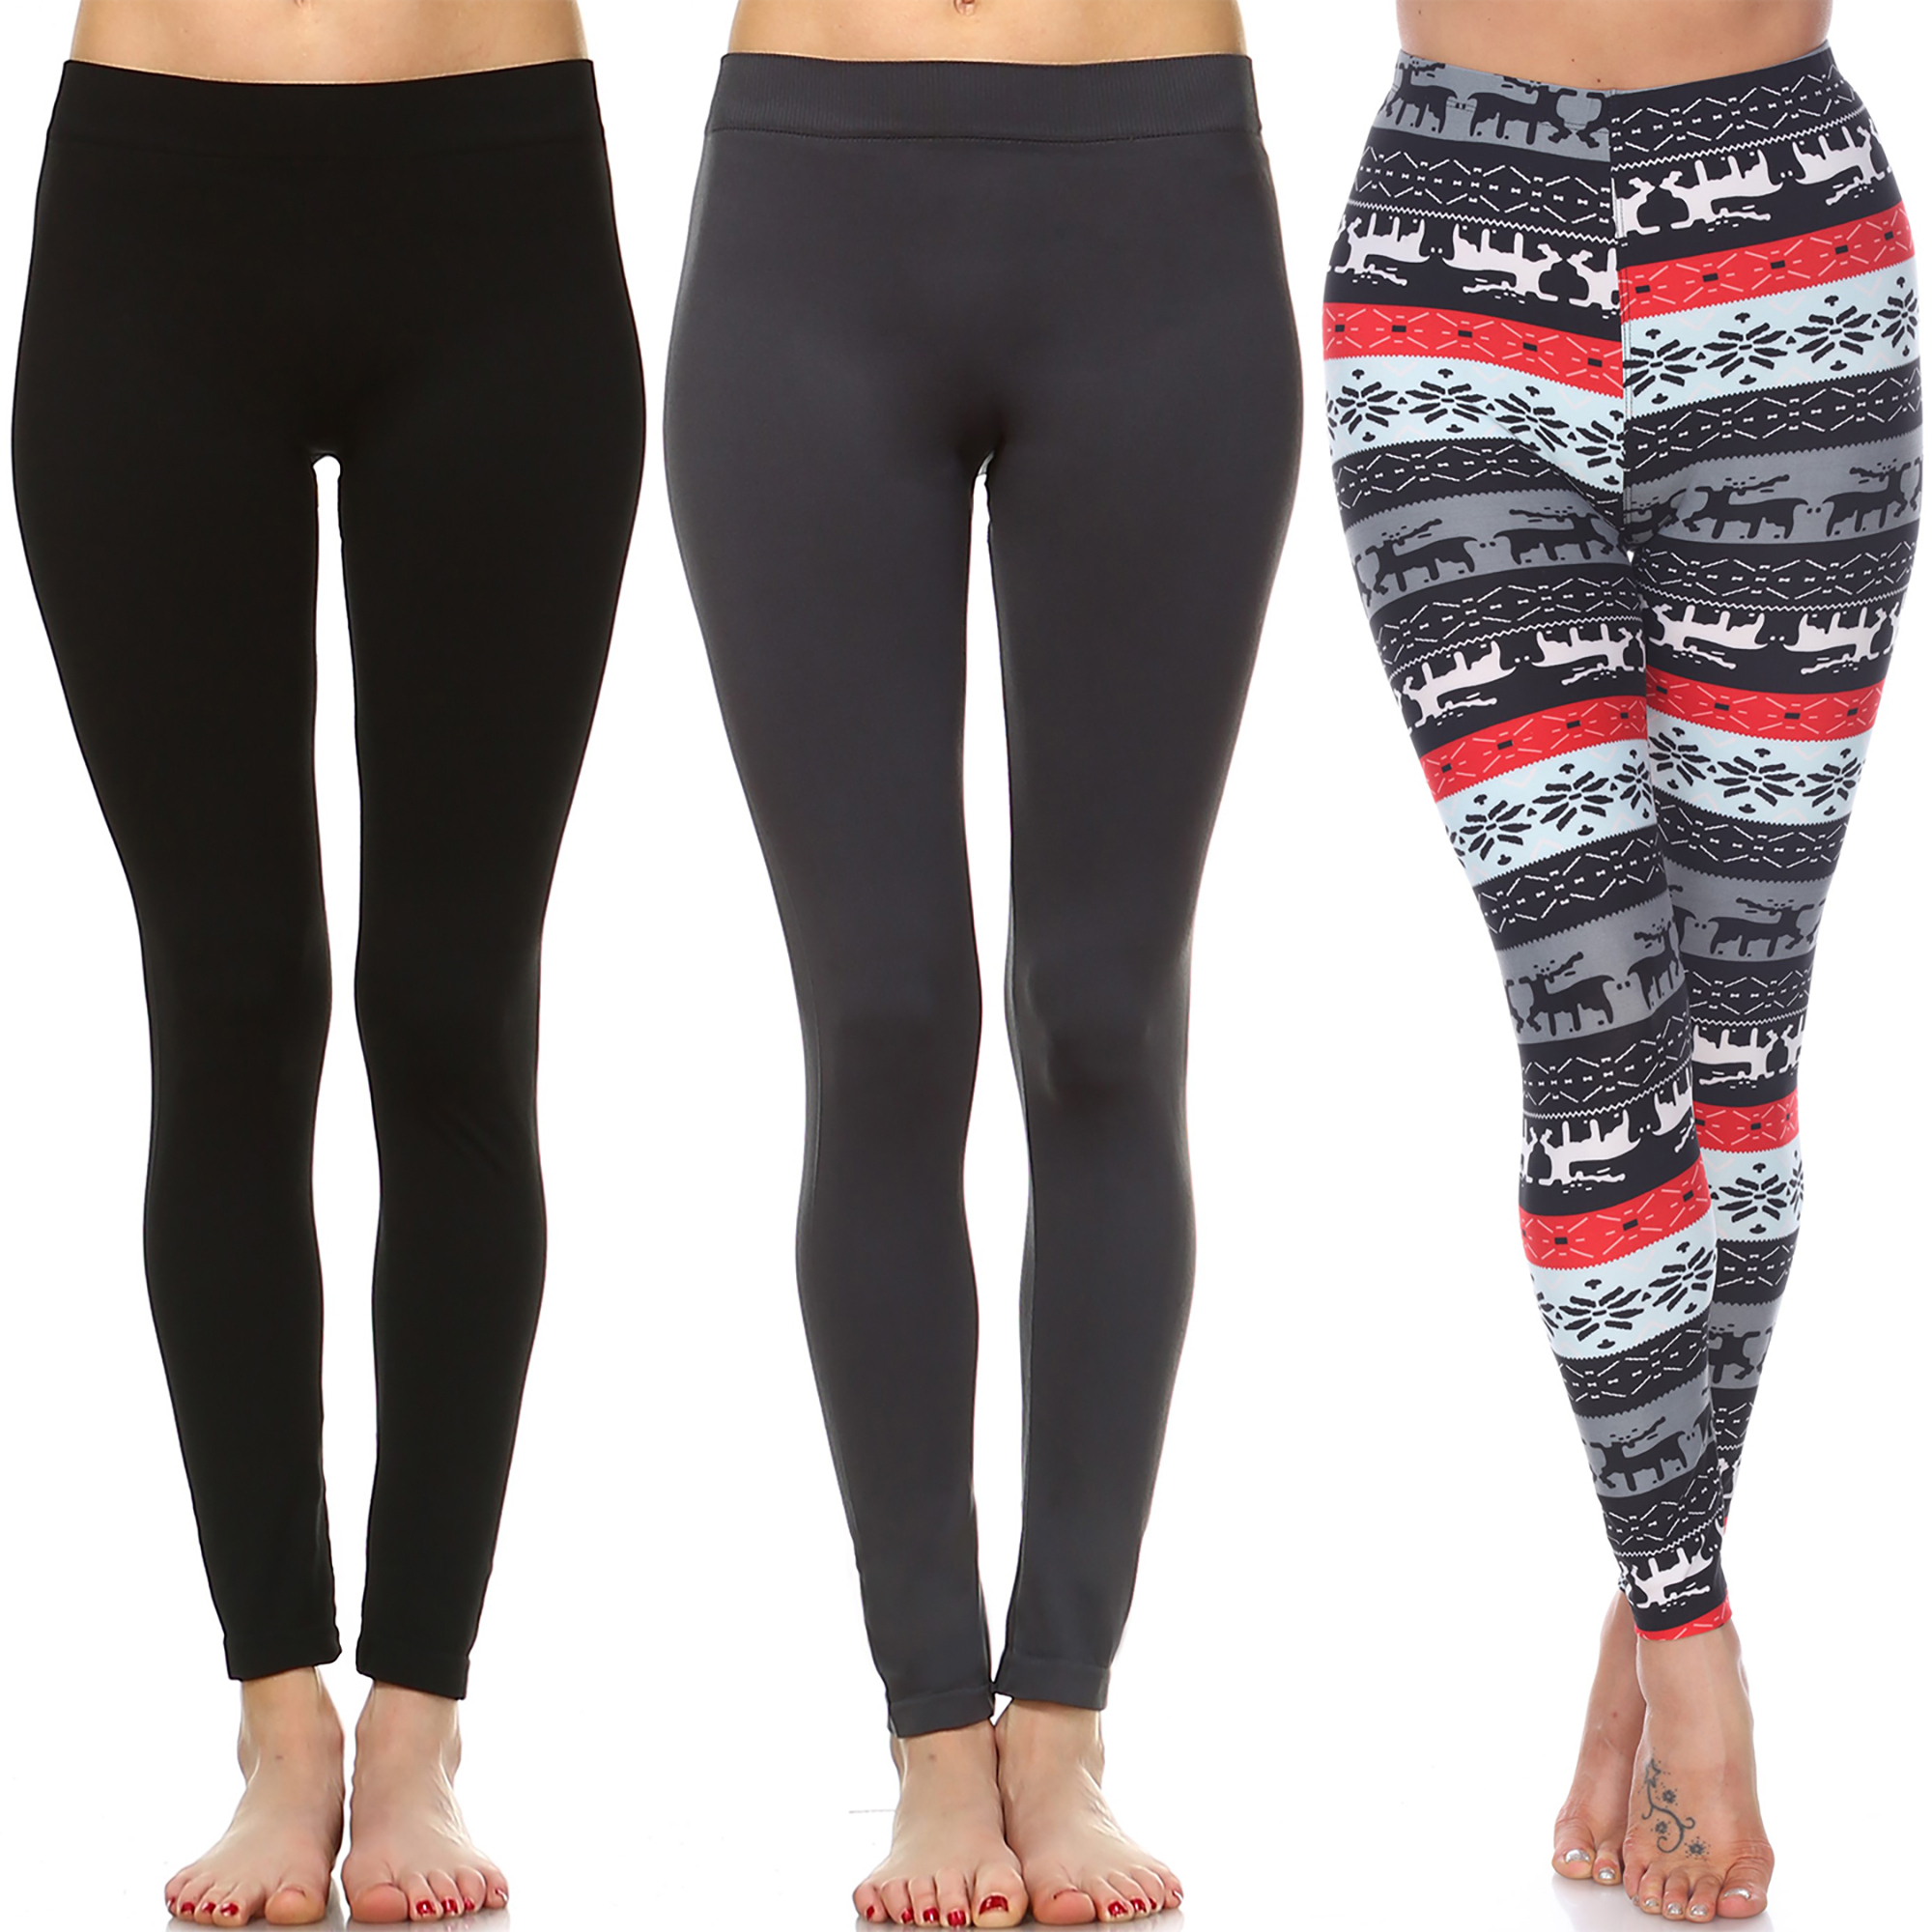 White Mark Women's Pack Of 3 Holiday Leggings - Black, Charcoal, Red/Grey, One Size Plus